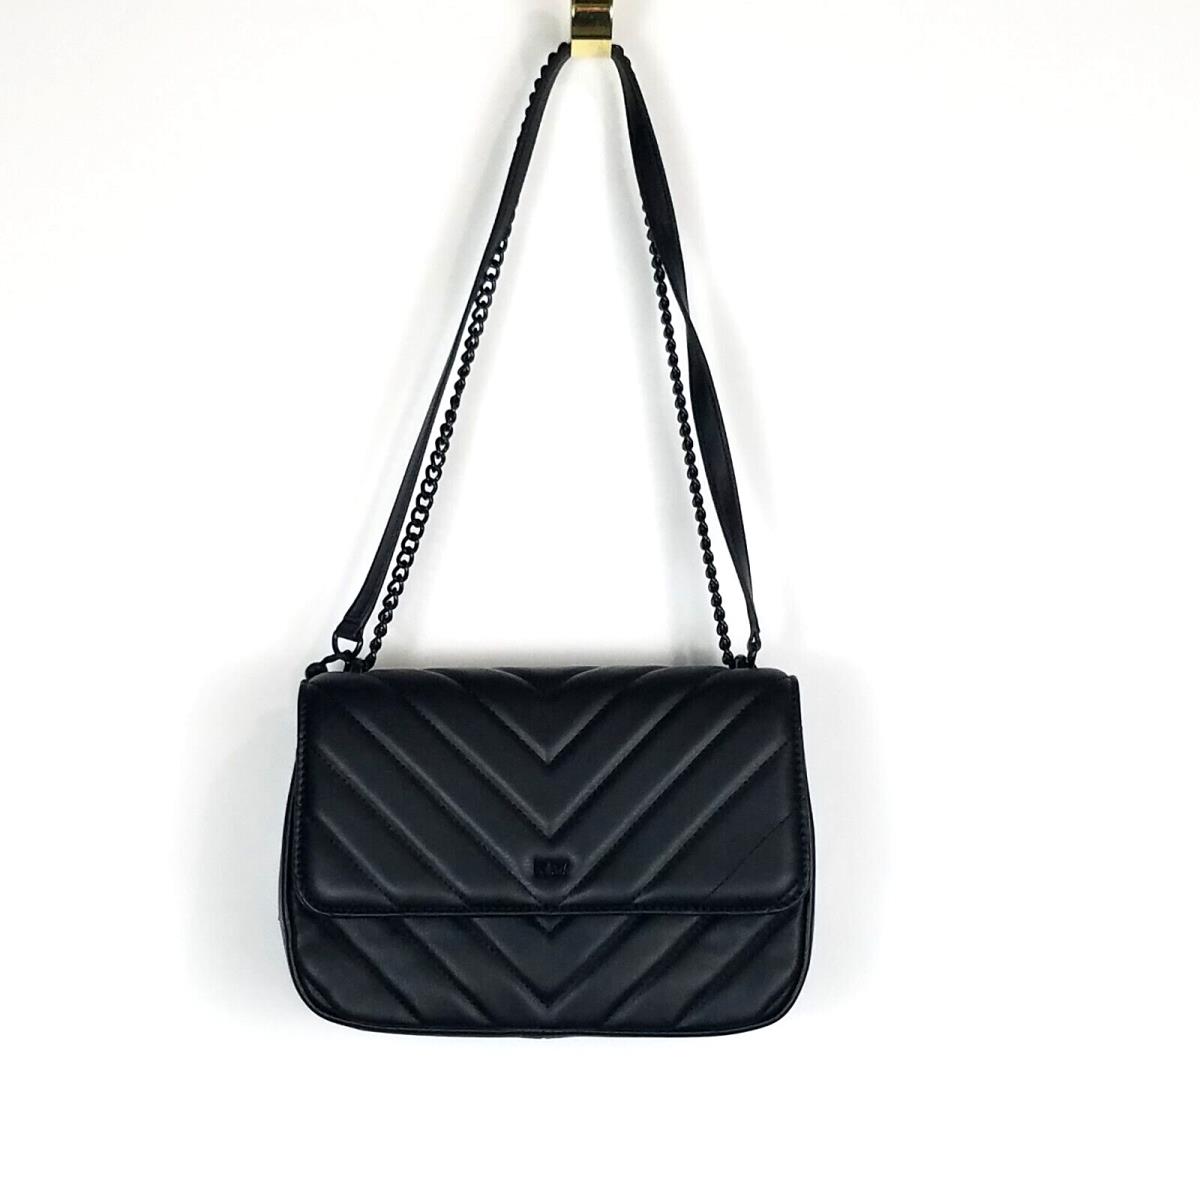 Dkny Veronica Shoulder Bag Large Quilted Black Puffy Crossbody Purse